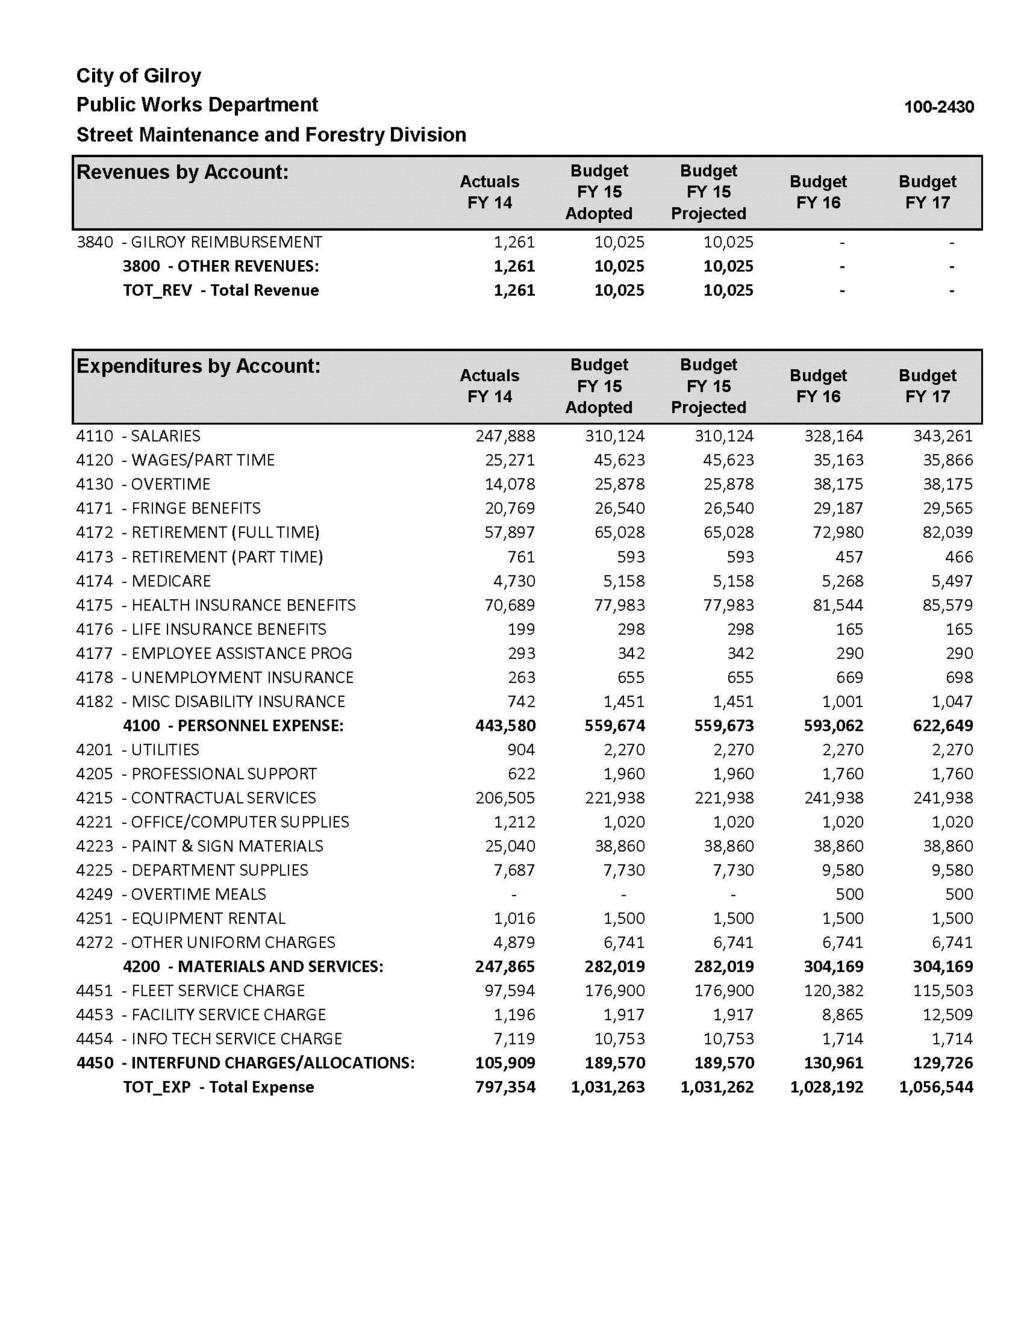 How to Read the Budget Sources of income received by the City Budget Document shows two year history (FY 14 and FY 15) as compared to the proposed twoyear budget (FY 16 and FY 17) Uses of income;